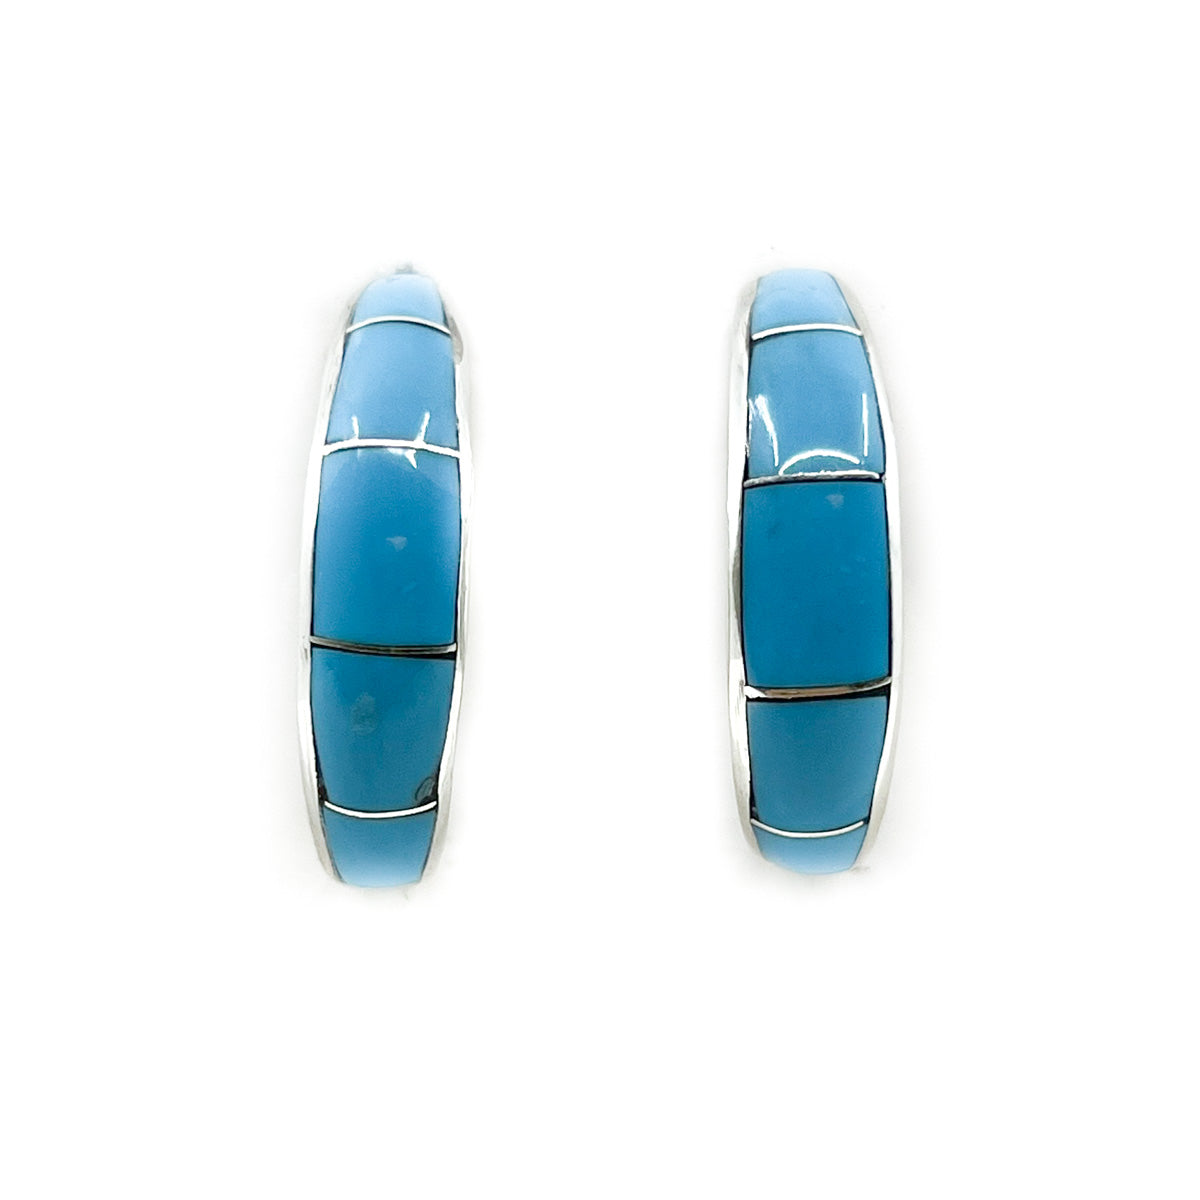 Handcrafted turquoise channel inlay hoop earrings by Zuni artist Philbert Chavez Each earring measures approximately .25 inches in width and 1 inch in diameter Sterling silver posts and backs *All sales on jewelry are final. No returns or exchanges.